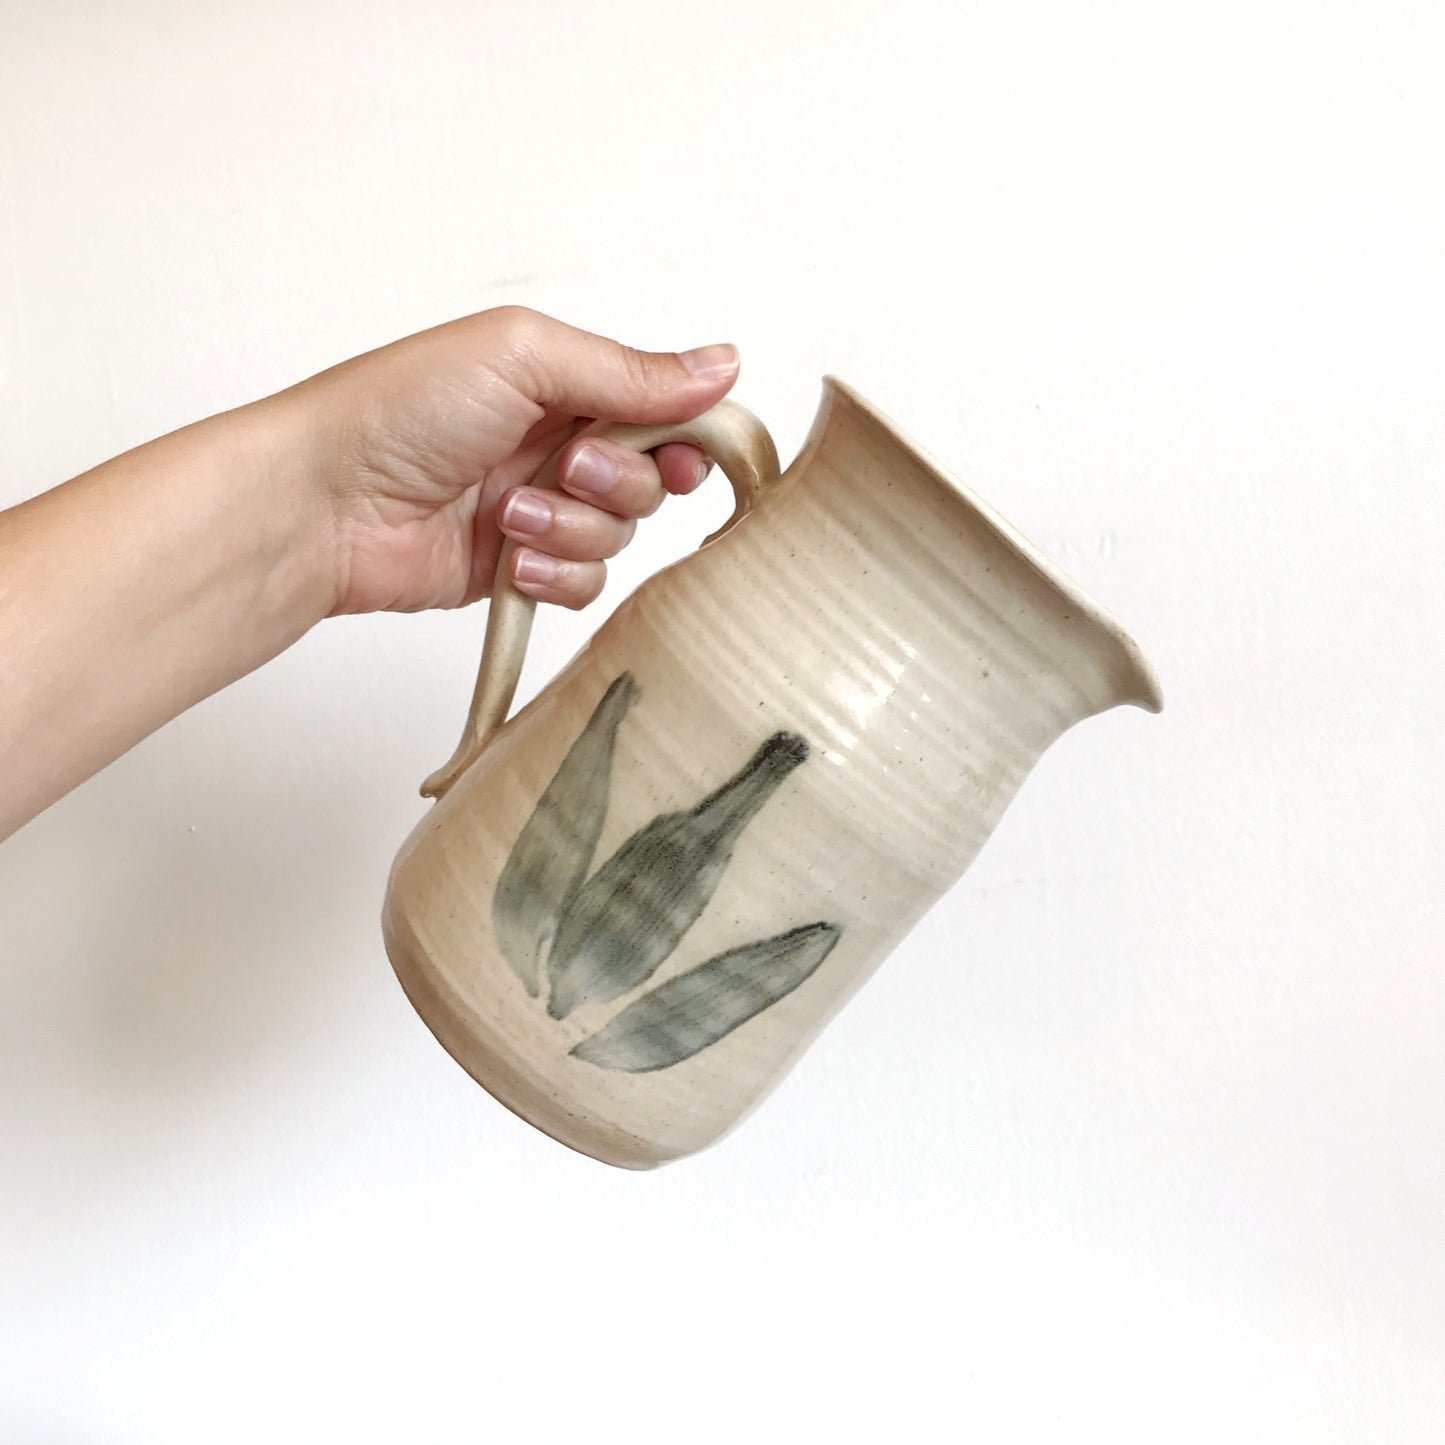 Vintage Stoneware Pitcher with Abstract Strokes